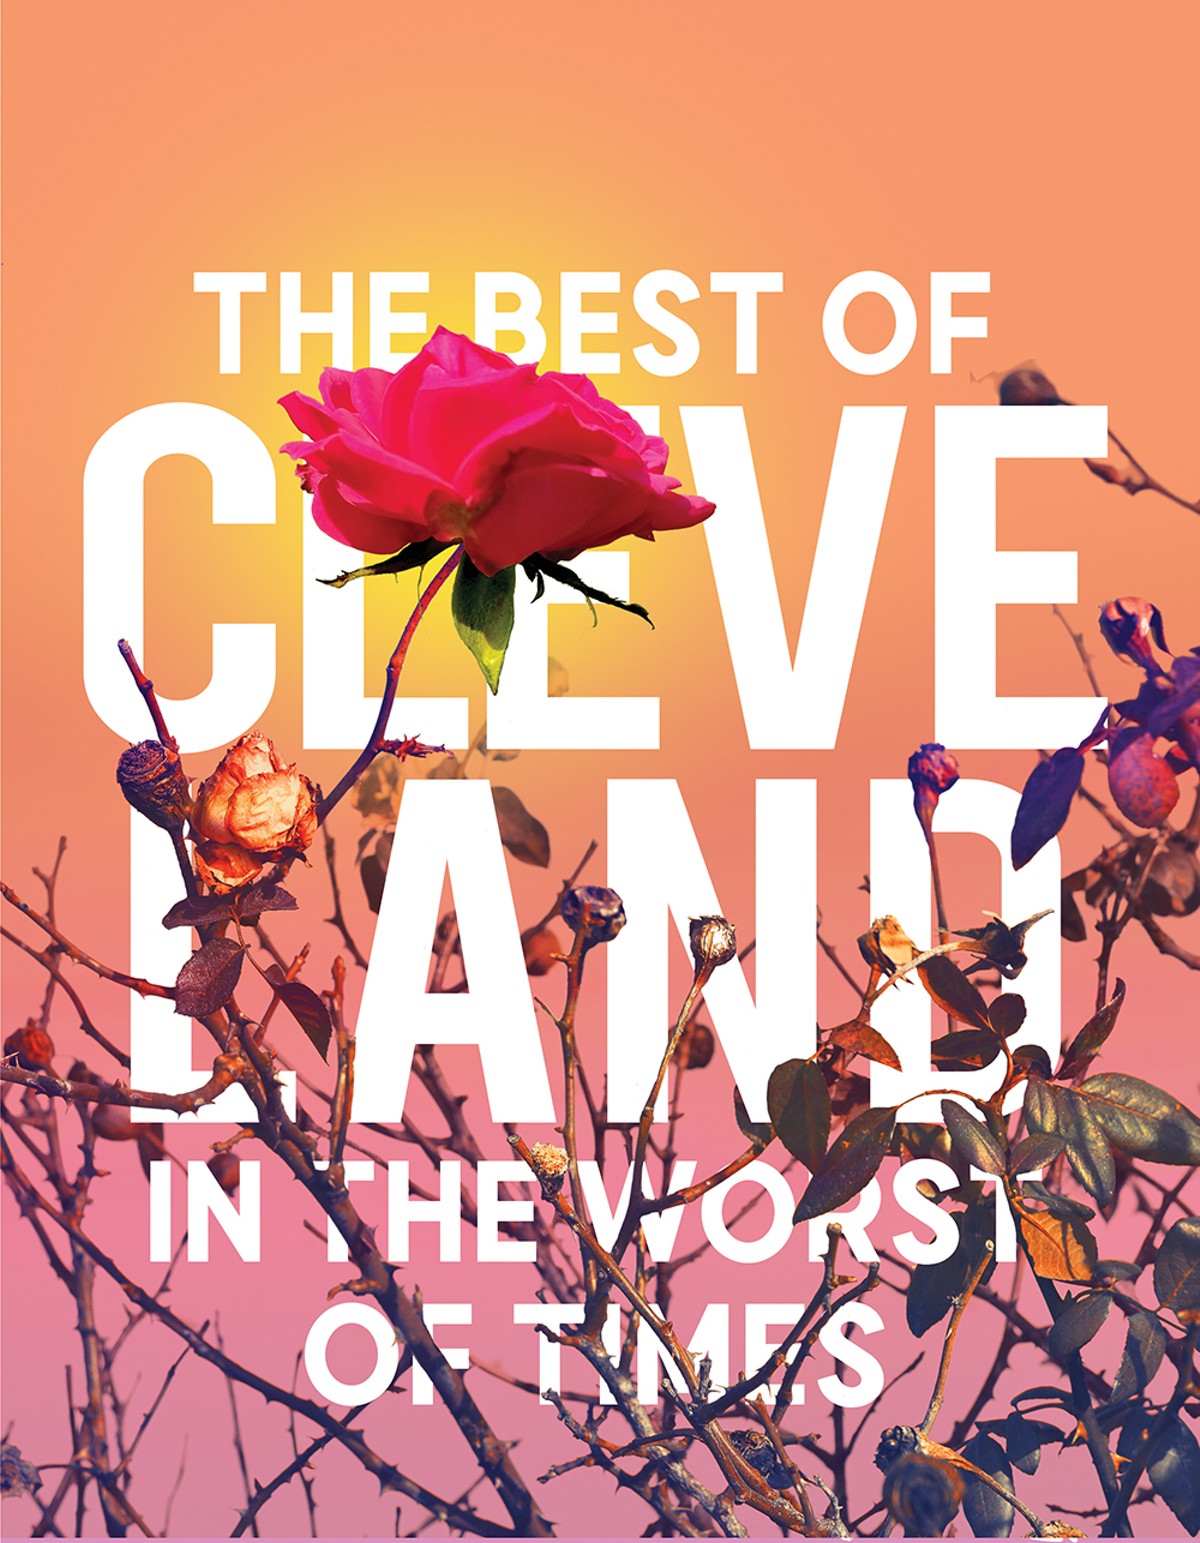 Best of Cleveland: People & Places